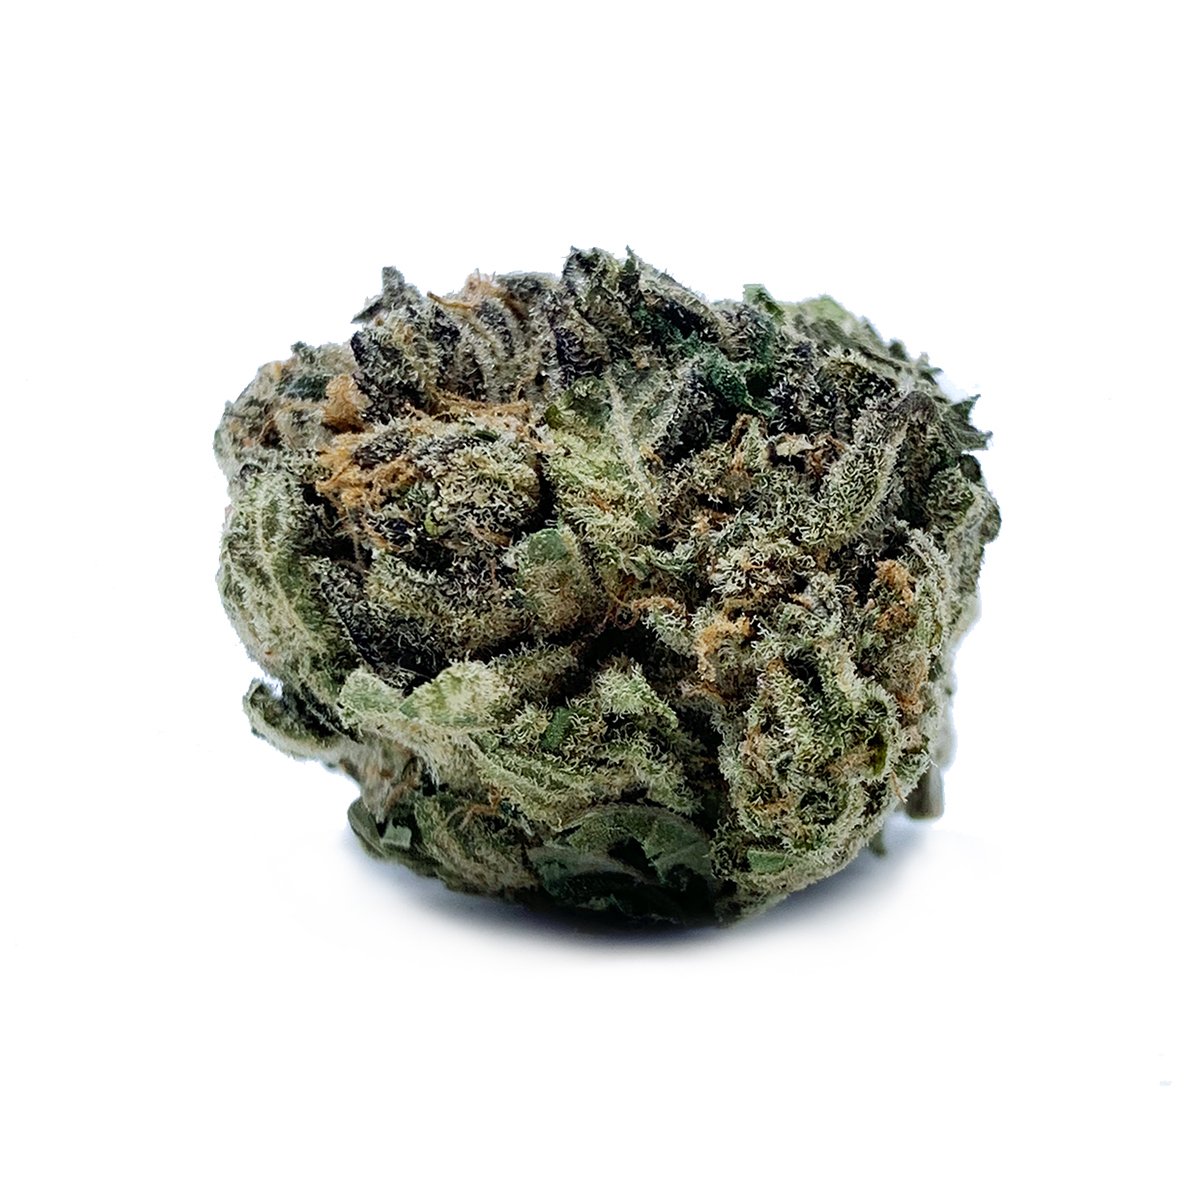 Budget Buds Alien Bubba | Buy Weed Online | Dispensary Near Me